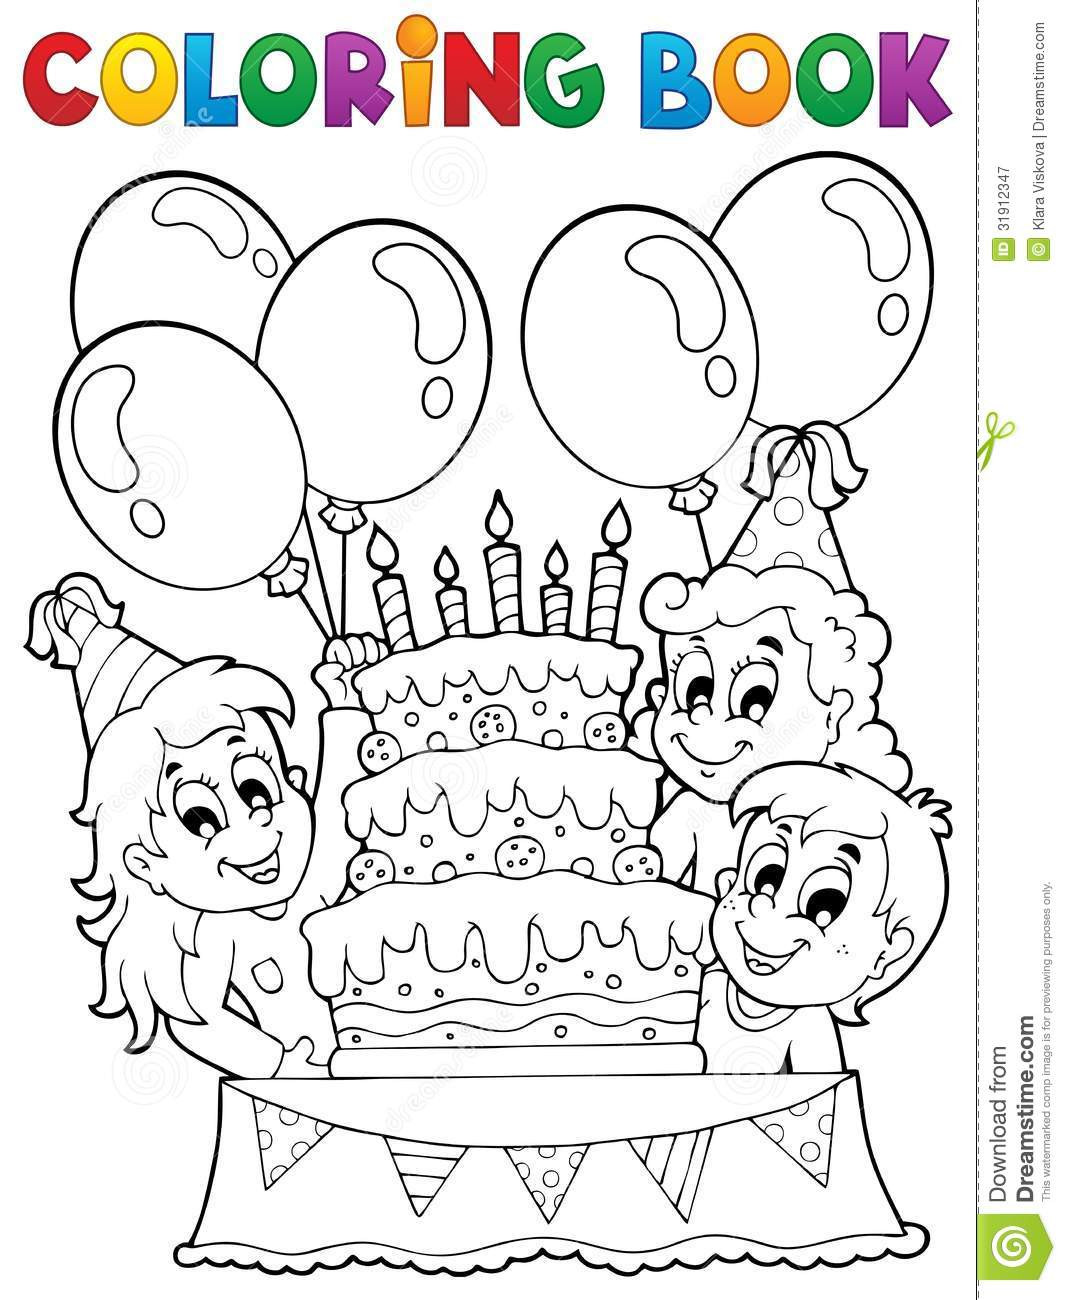 Coloring Book Kids
 Coloring Book Kids Party Theme 2 Stock Vector Image